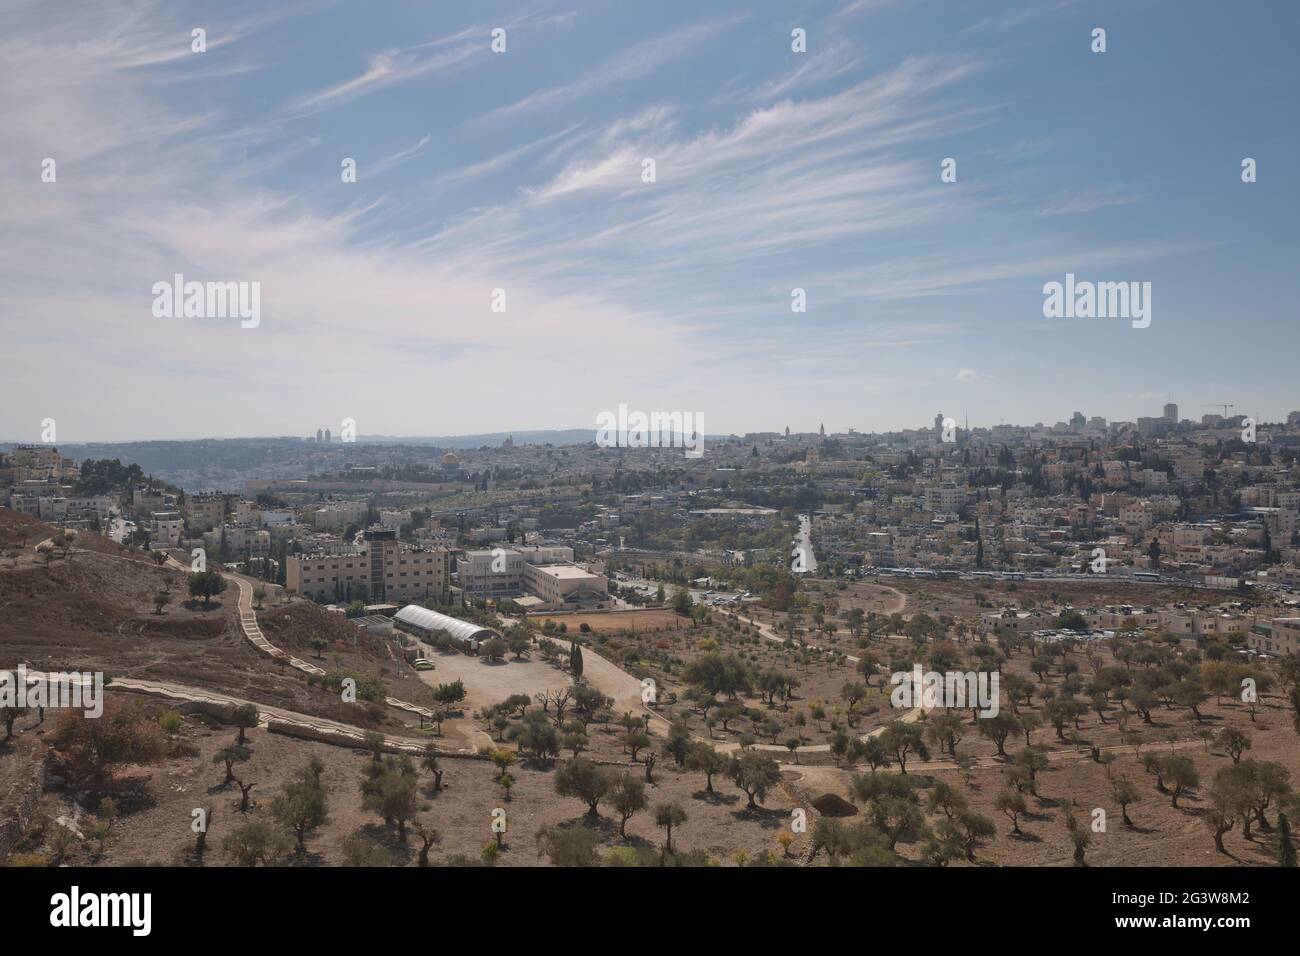 View of Holy city of Jerusalem in Israel from the Mount of Olives Stock Photo